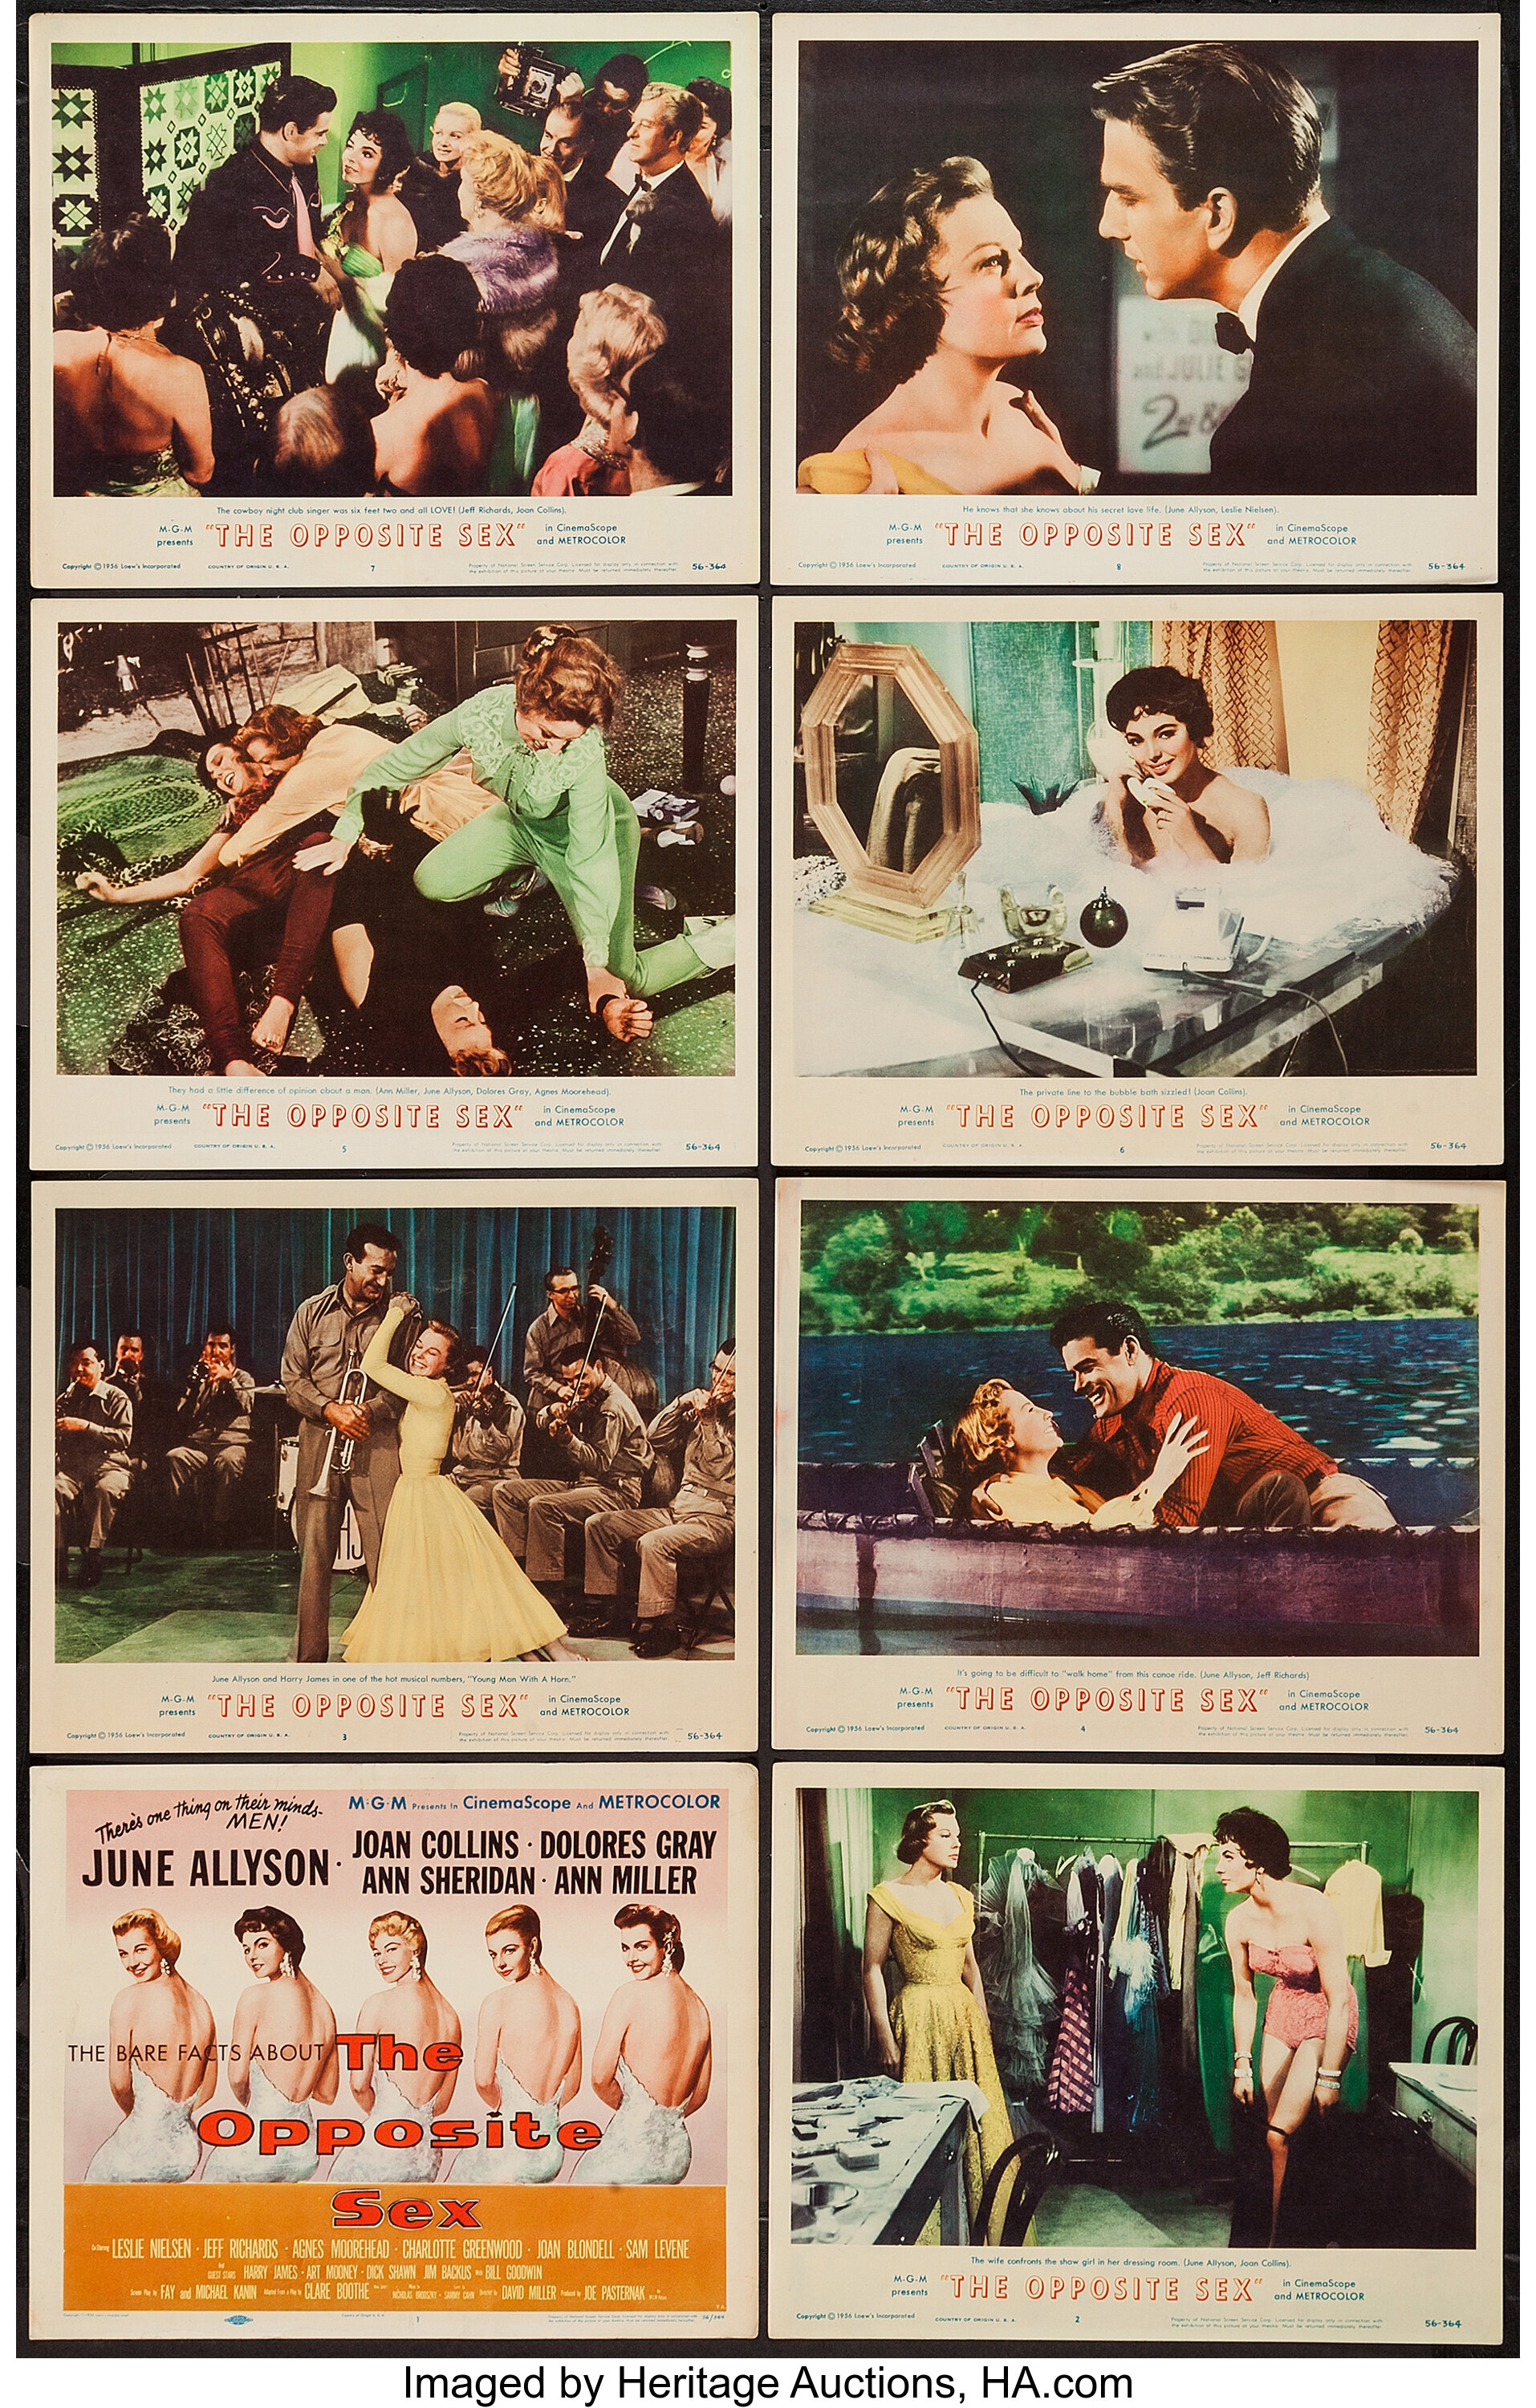 The Opposite Sex Mgm 1956 Lobby Card Set Of 8 11 X 14 Lot 52383 Heritage Auctions 3396